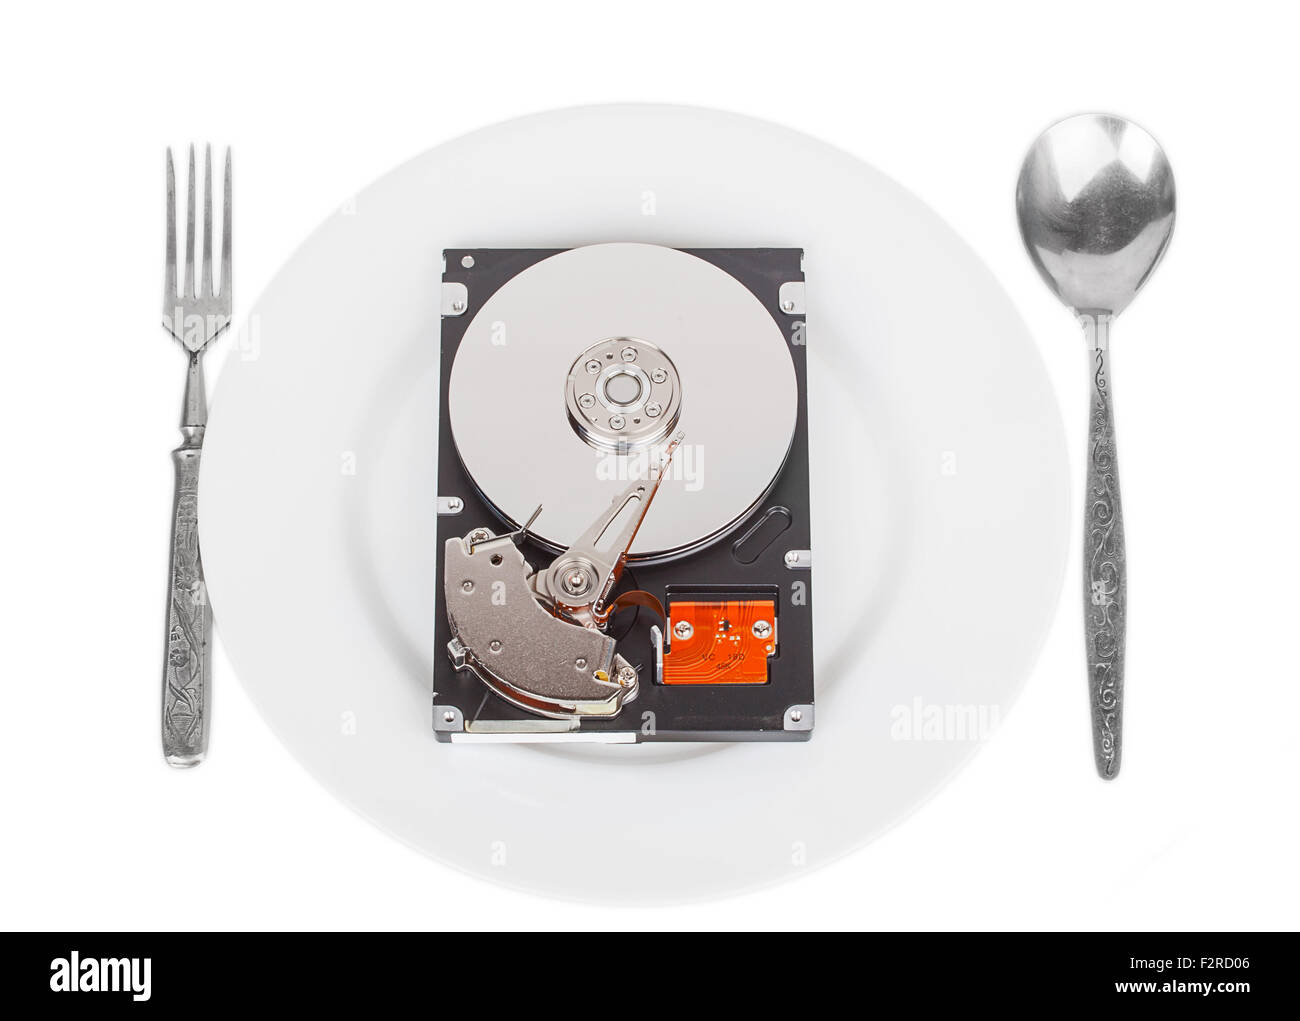 opened hard drive disk on a white plate with a fork and spoon isolated on the white background Stock Photo